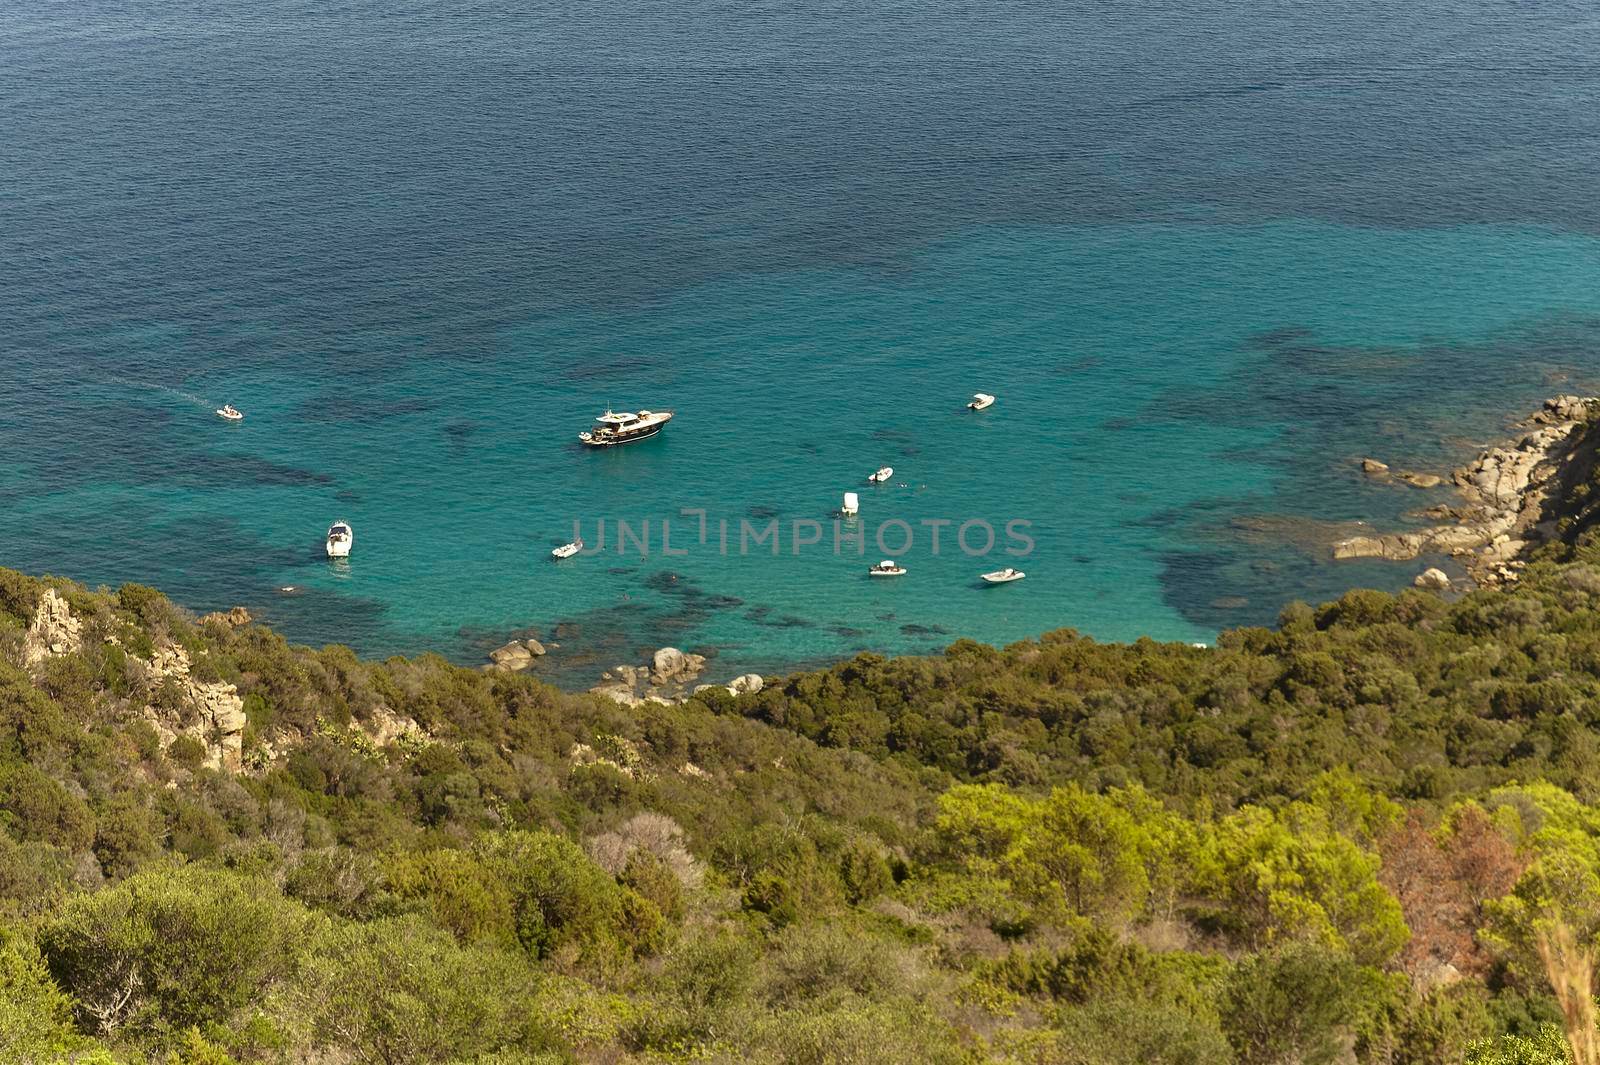 Top view of a portion of the coast facing the island of Serpentara in the south of Sardinia with some rubber boats used by tourists to visit this wonderful place.